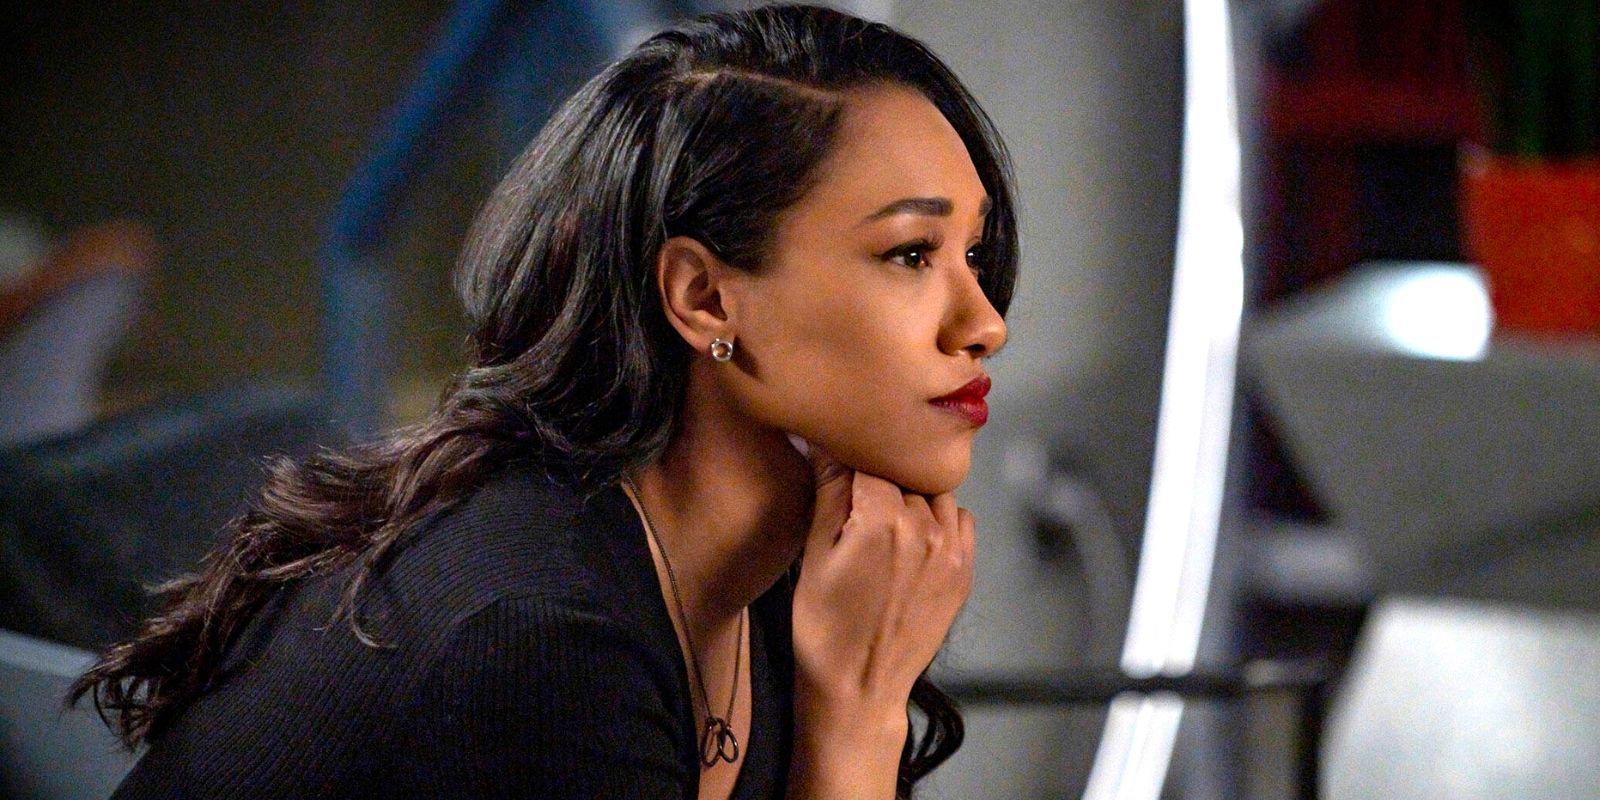 Iris West in The Flash ponders something, leaning her chin on her fist